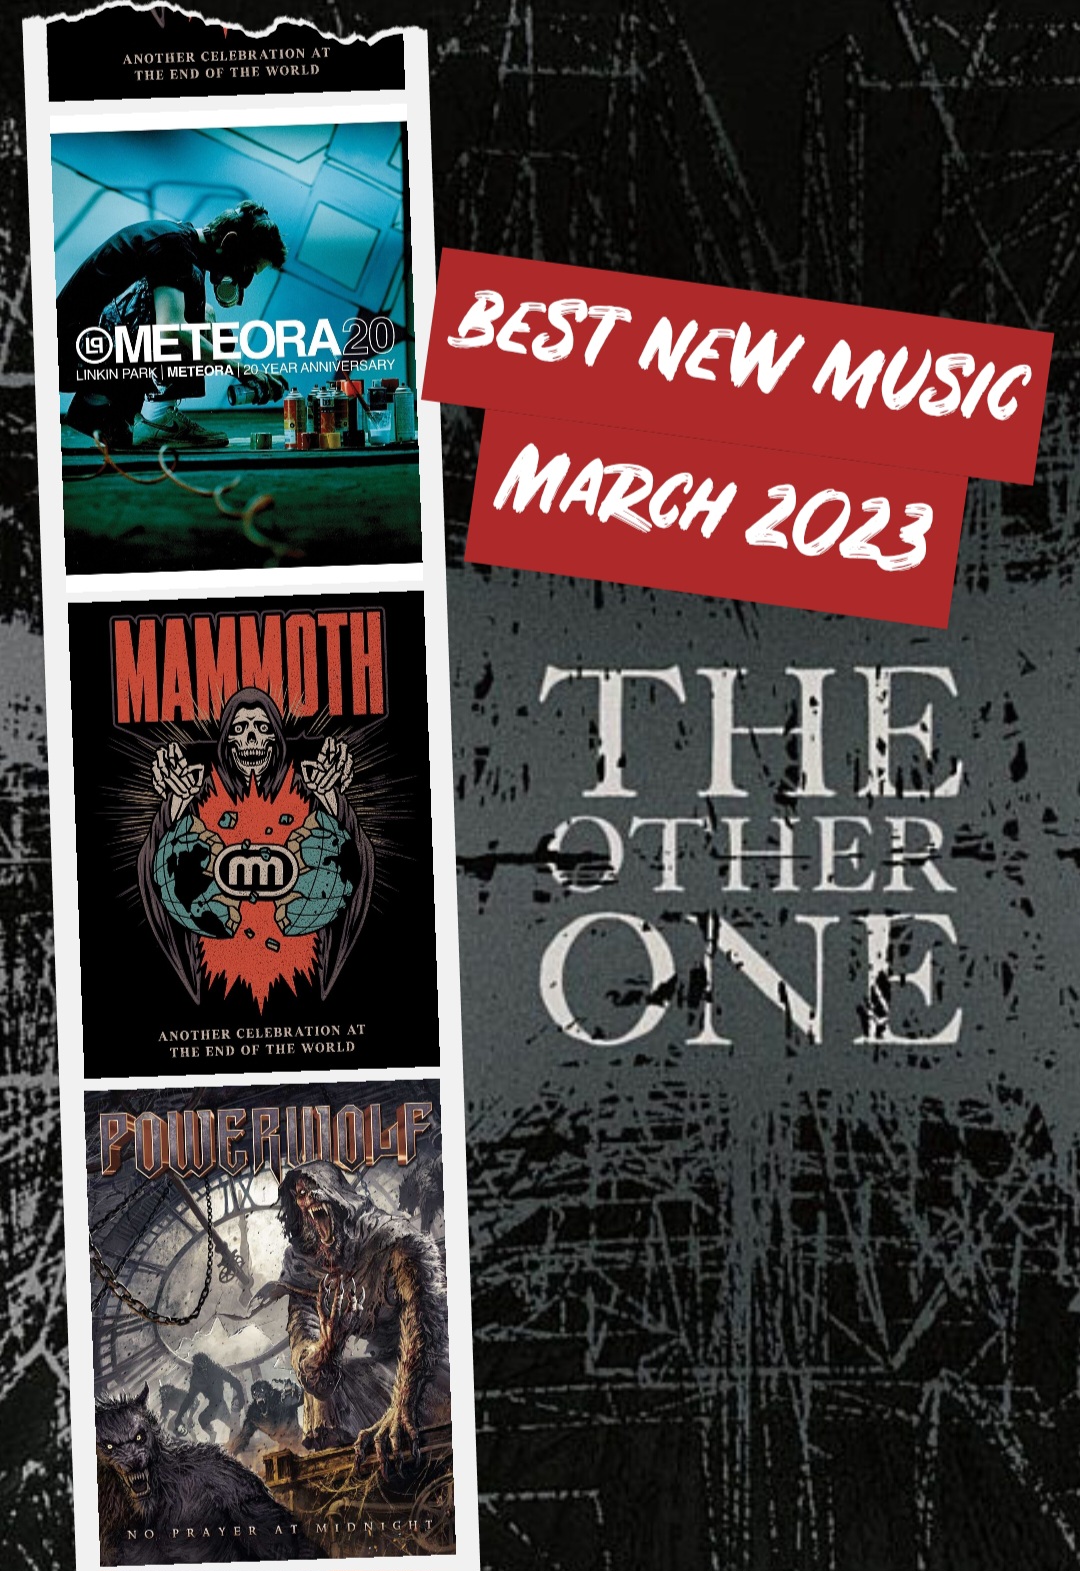 Best New Music March 2023